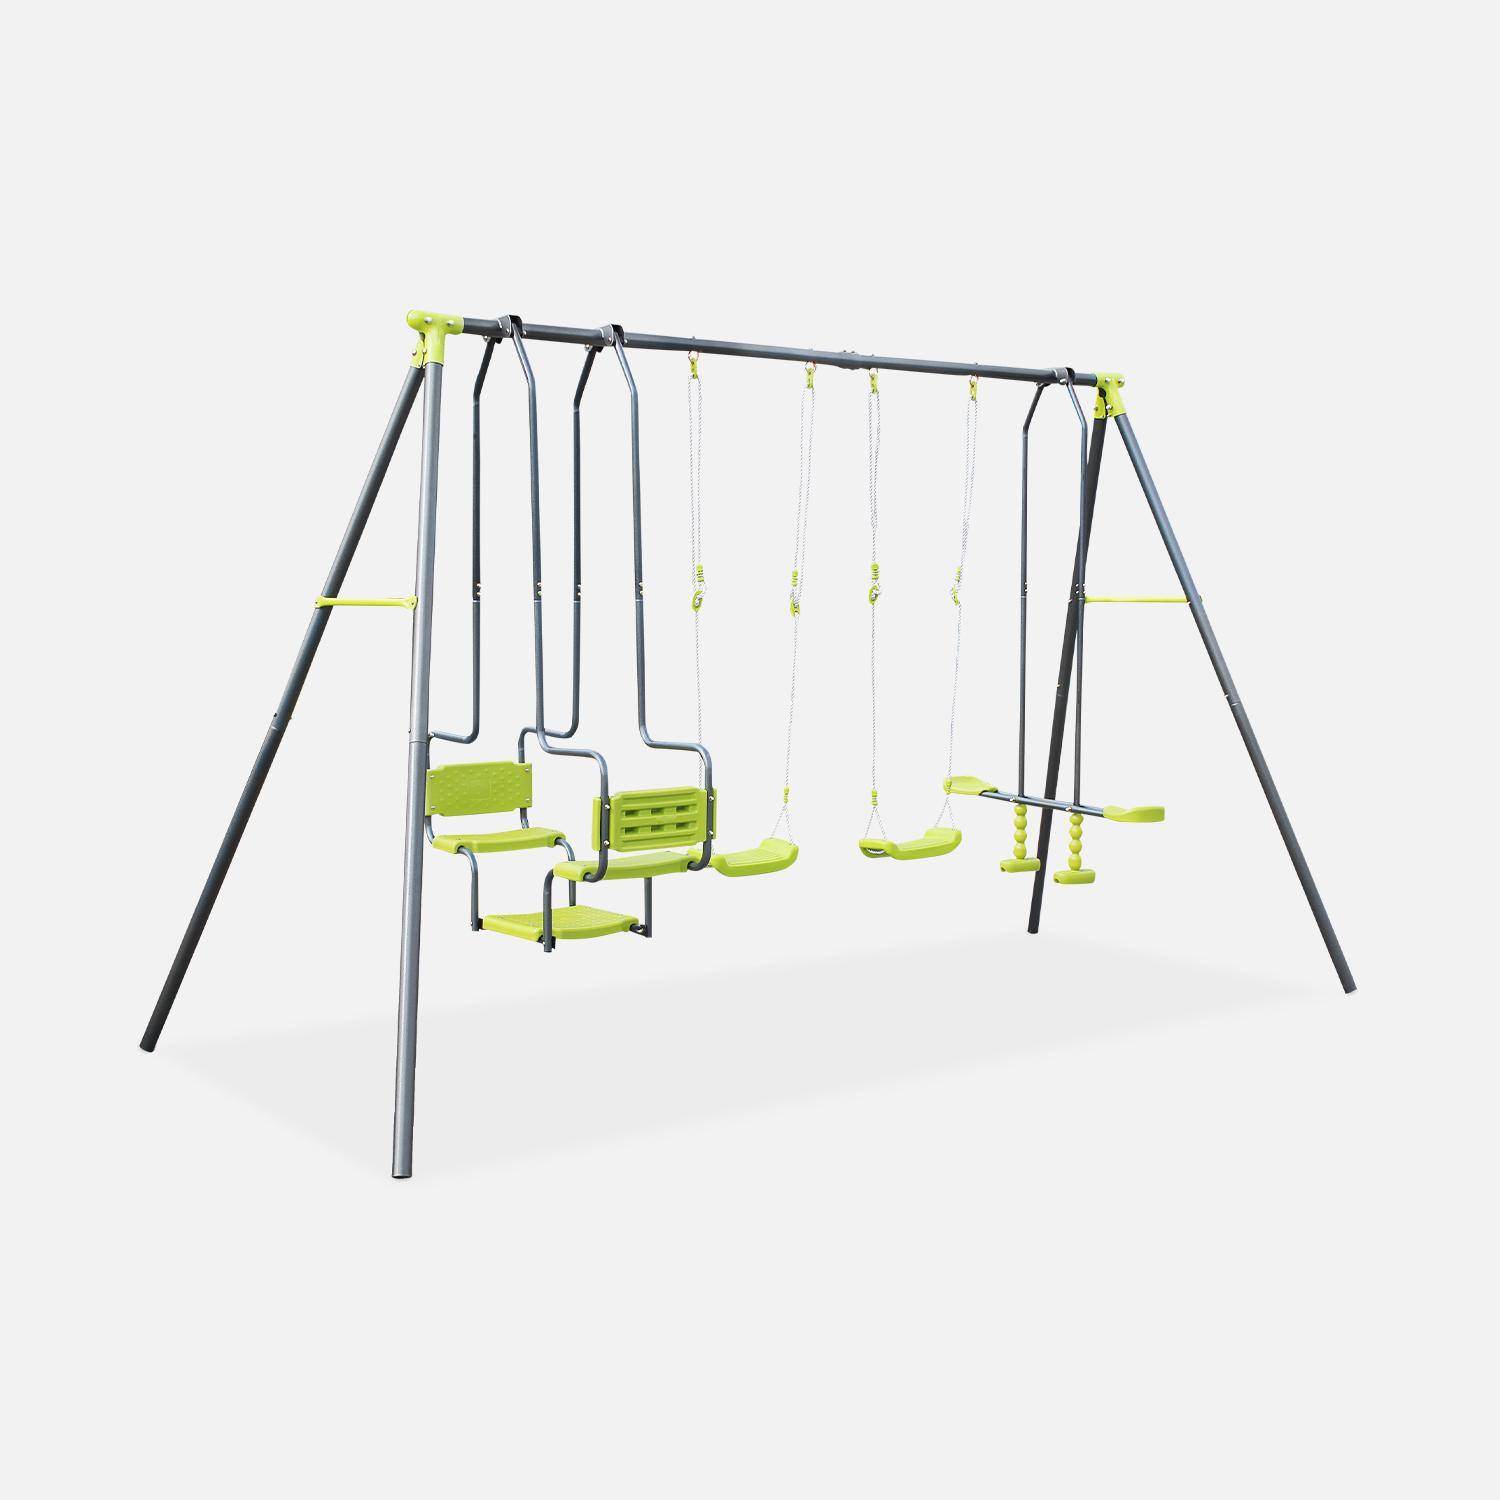 Swing set with 2 swings, 1 tandem swing and 1 two-seated glider, height 223cm Photo1